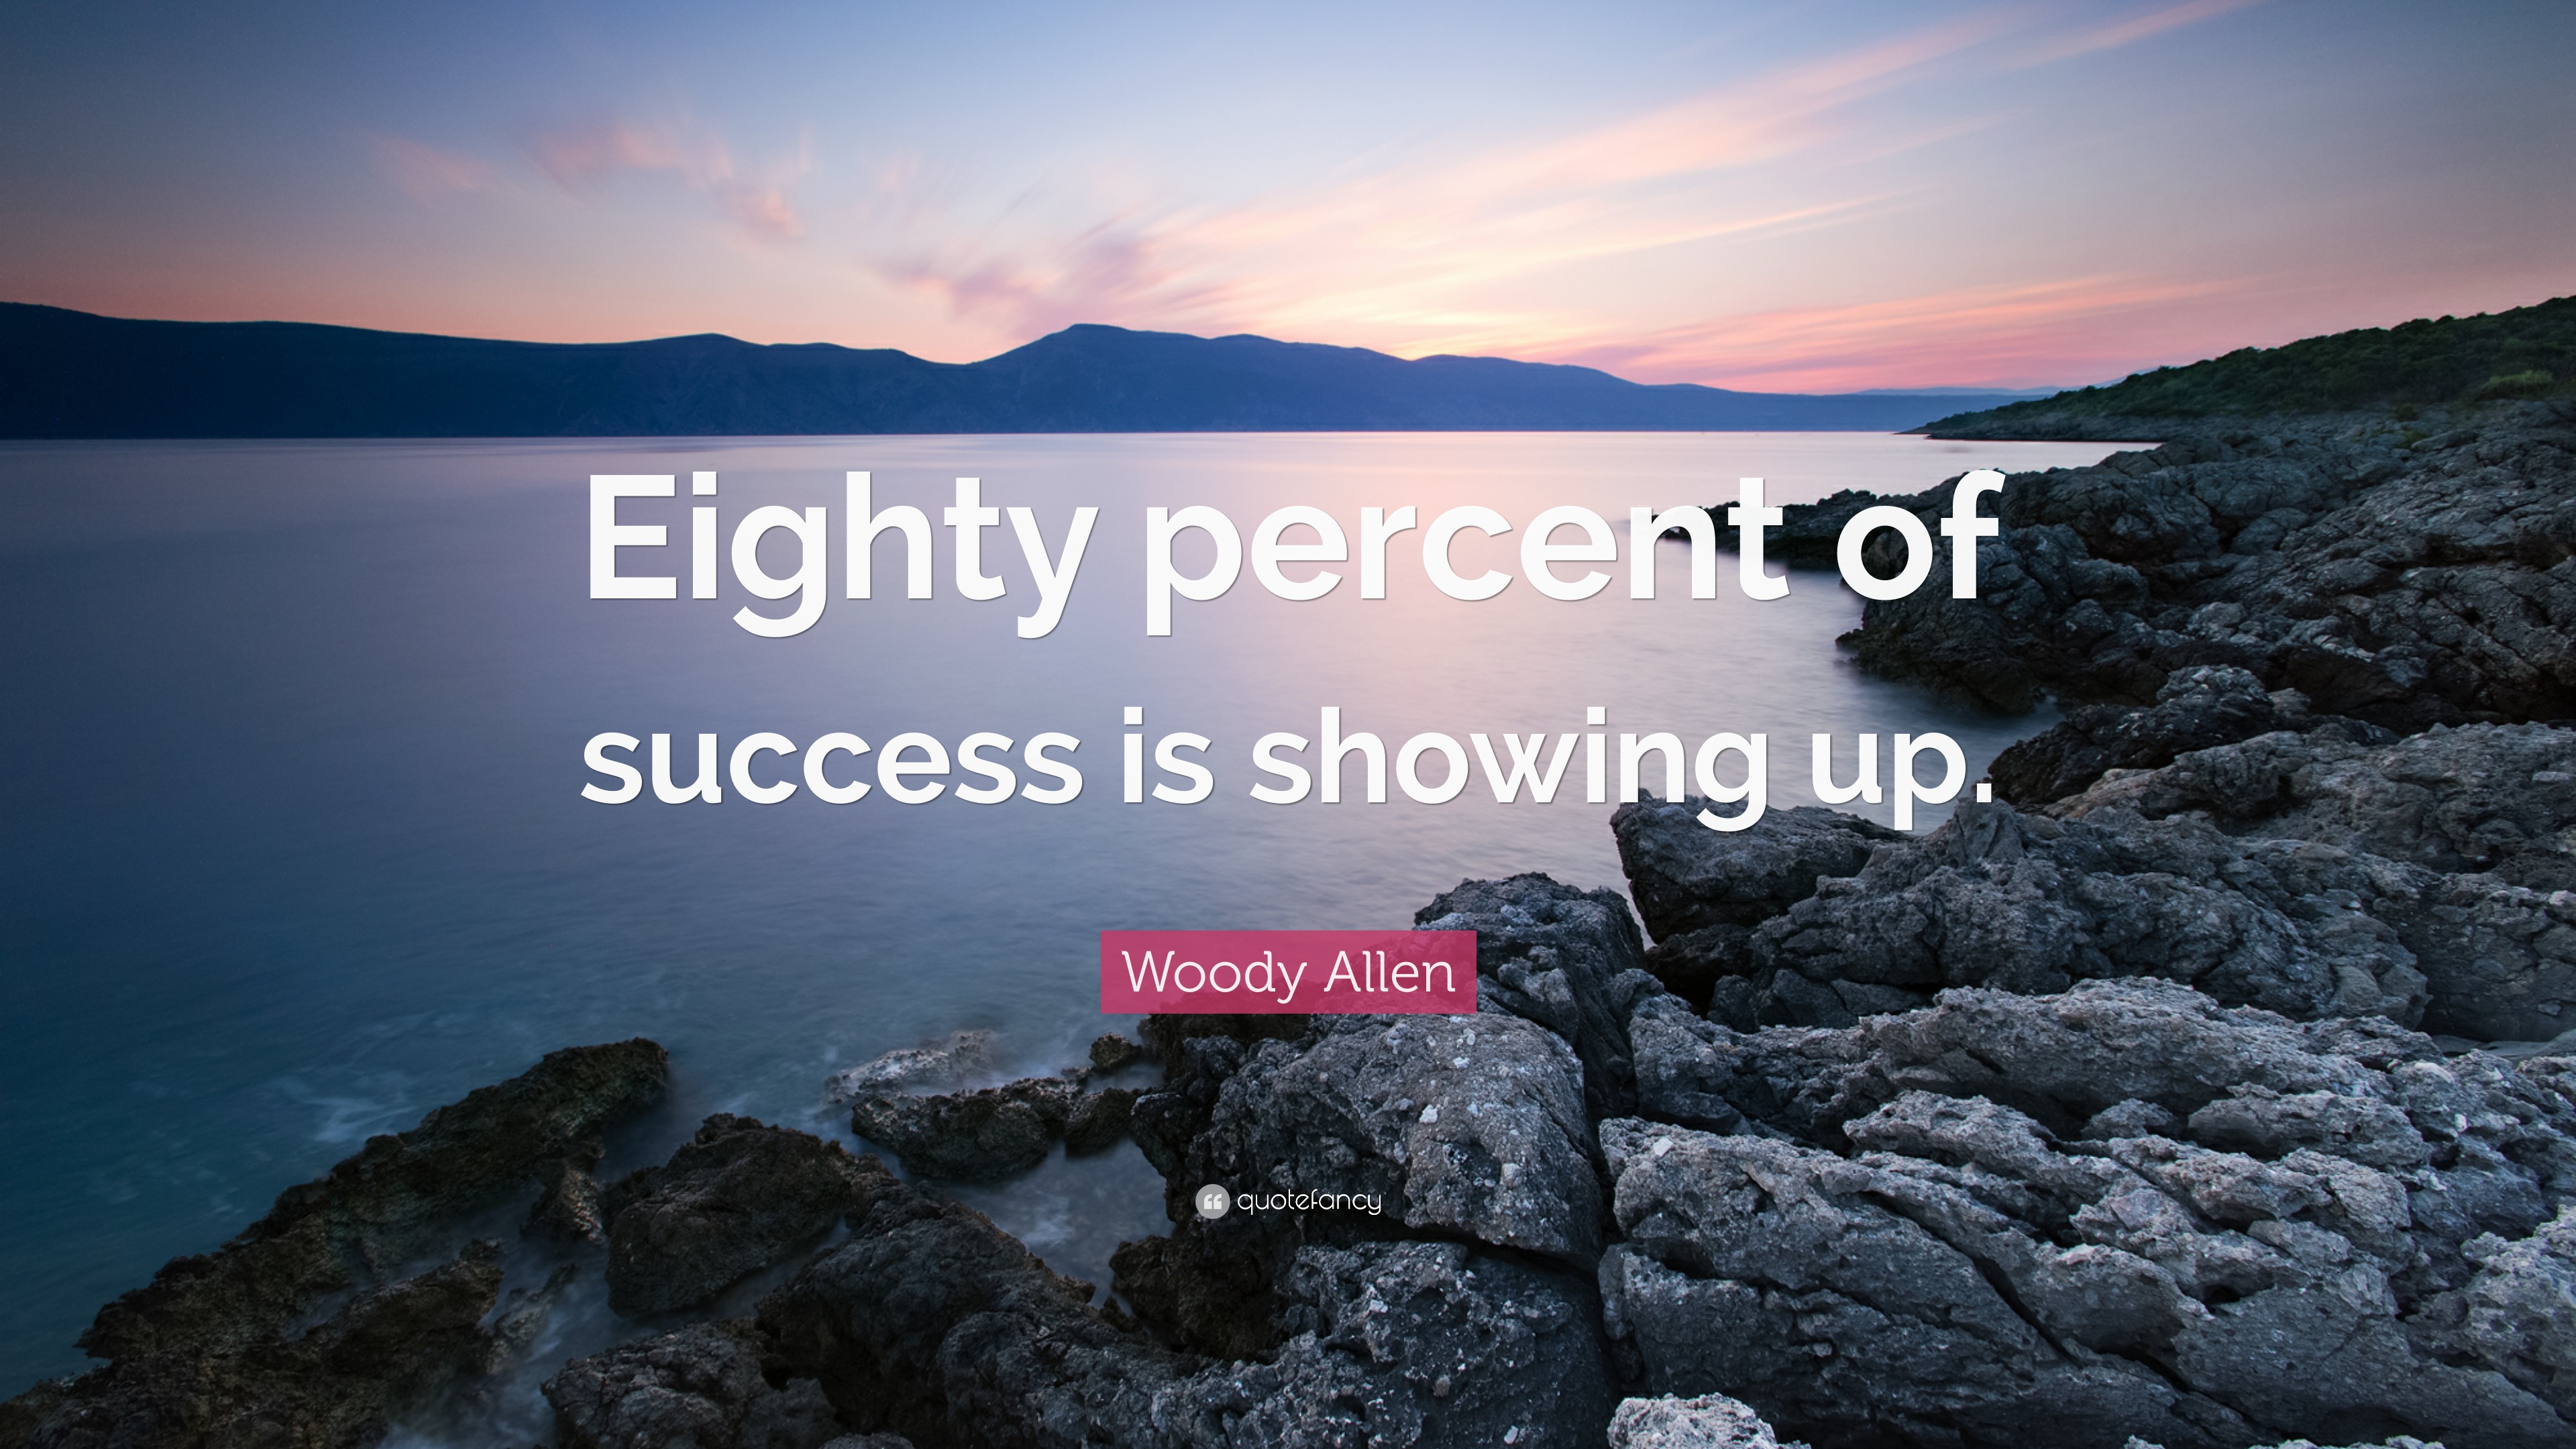 Woody Allen Quote “eighty Percent Of Success Is Showing Up” 7660